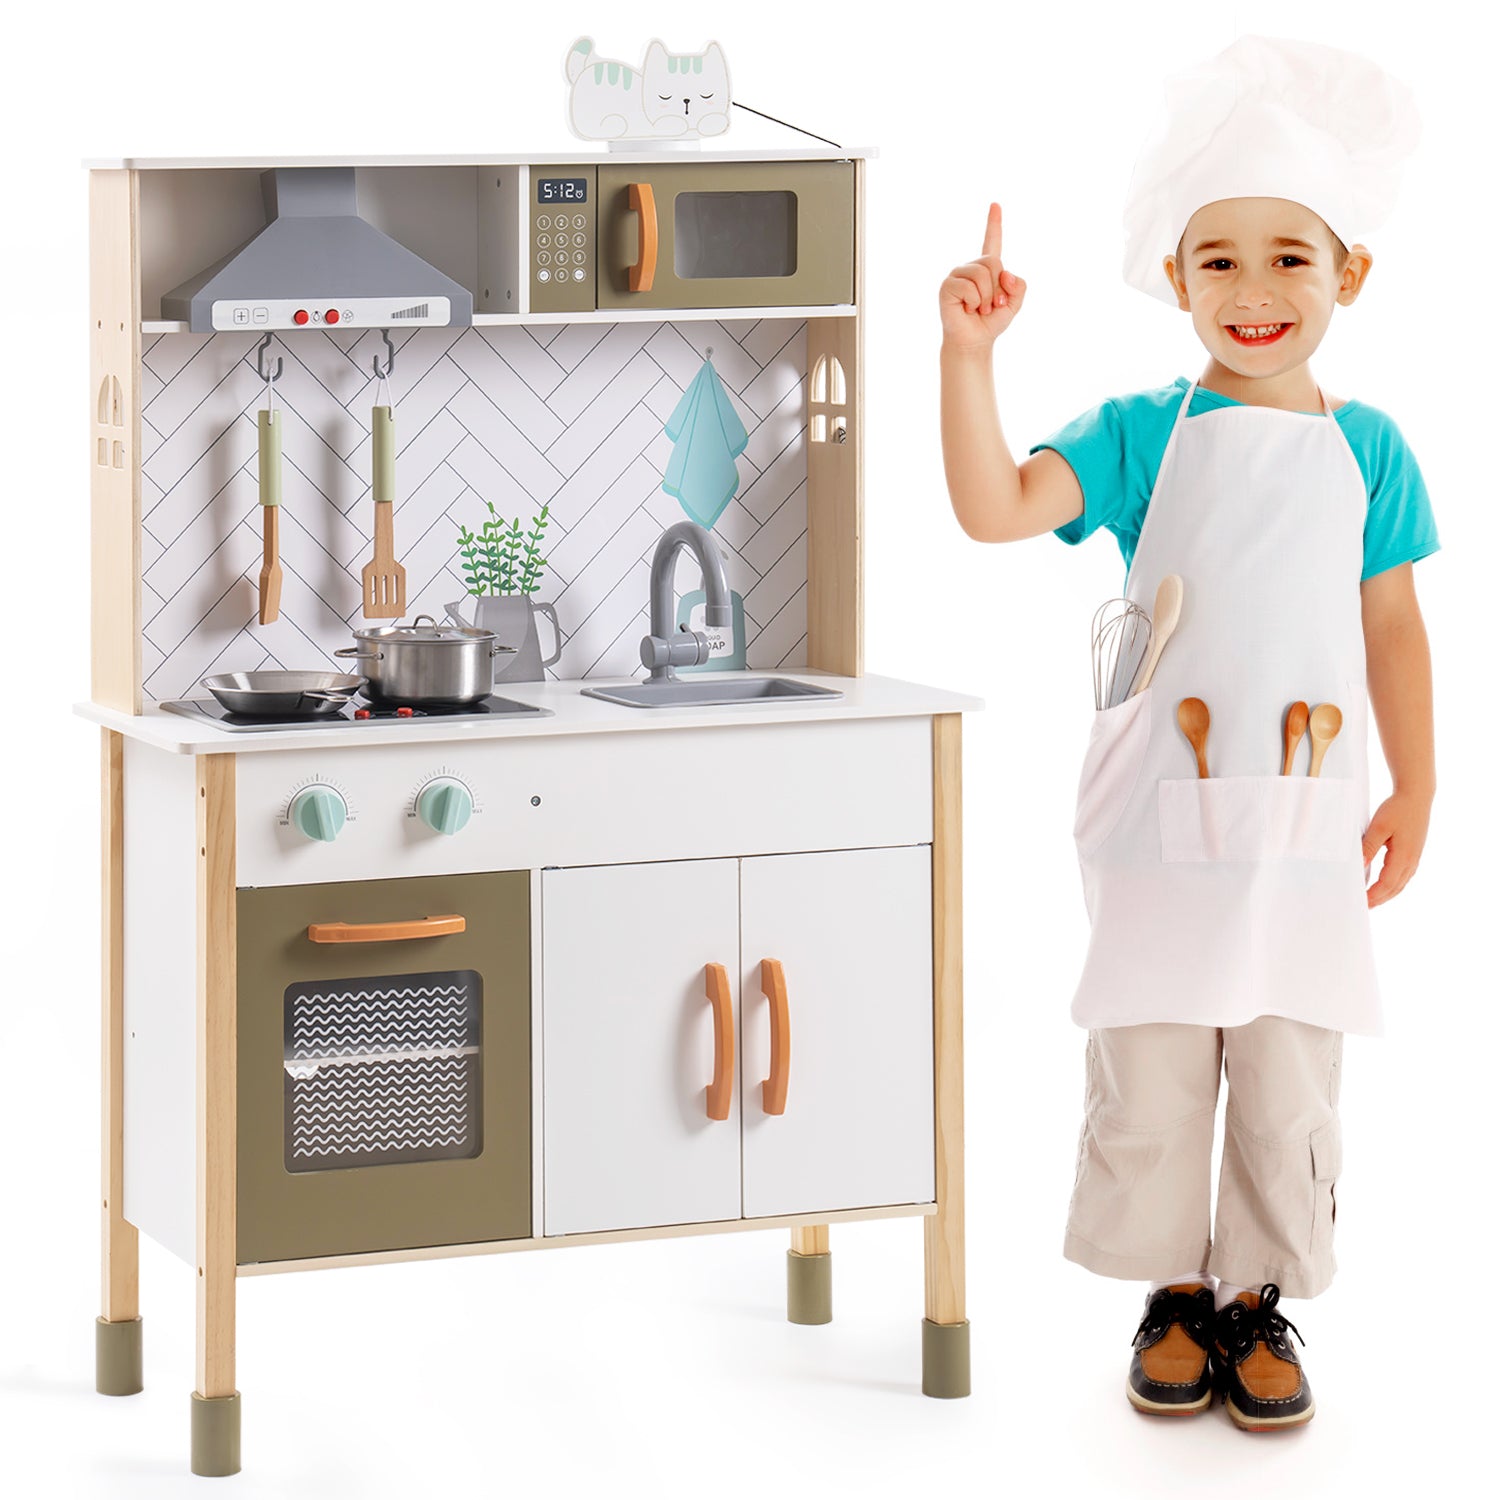 Classic Wooden Kitchen playset, Great Gift for Kids,Suitable for Christmas,Birthday and Party - Tonkn